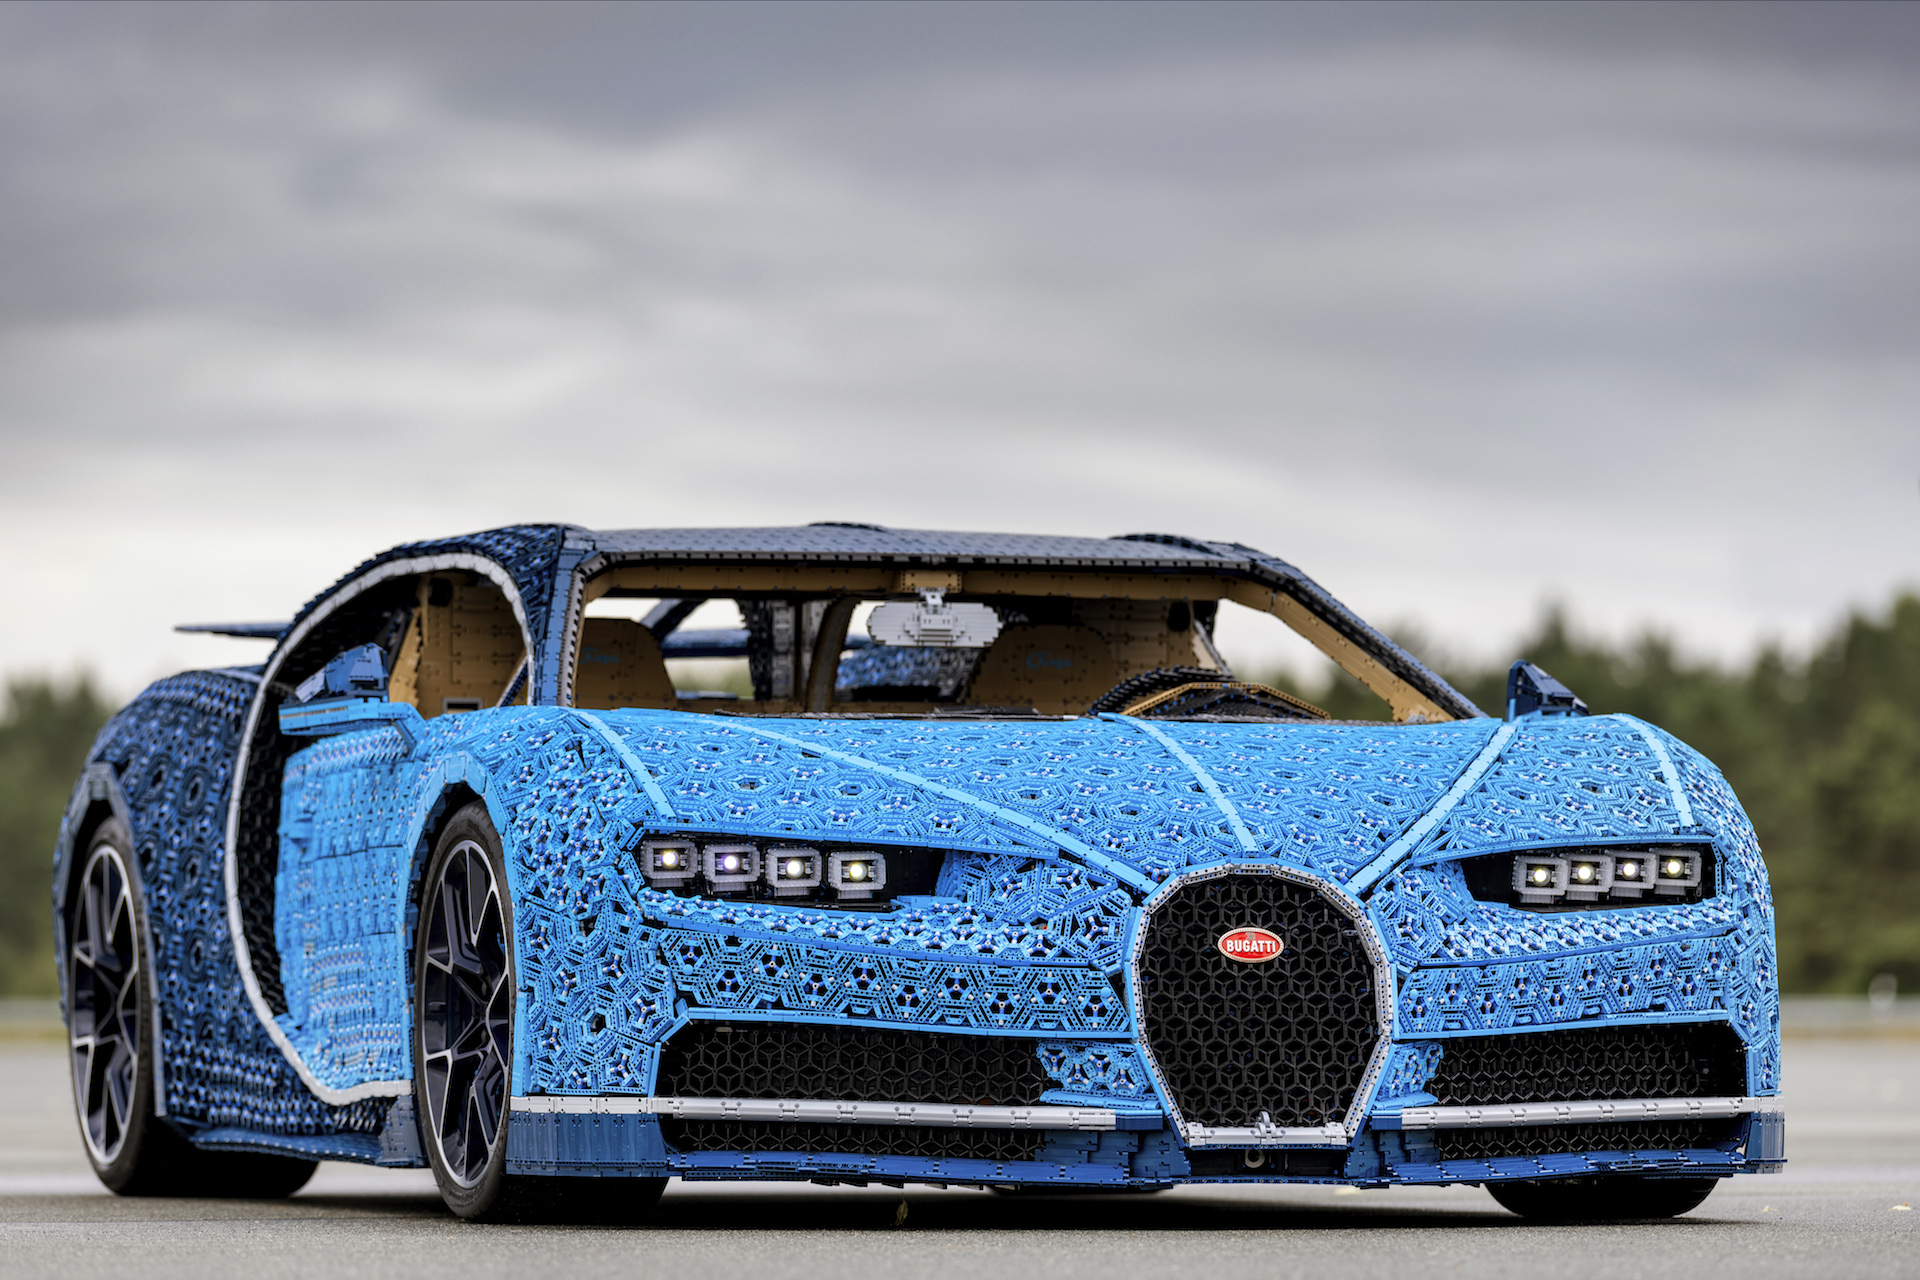 This Life Size, Drivable Lego Bugatti Chiron Has 304 Electric Motors